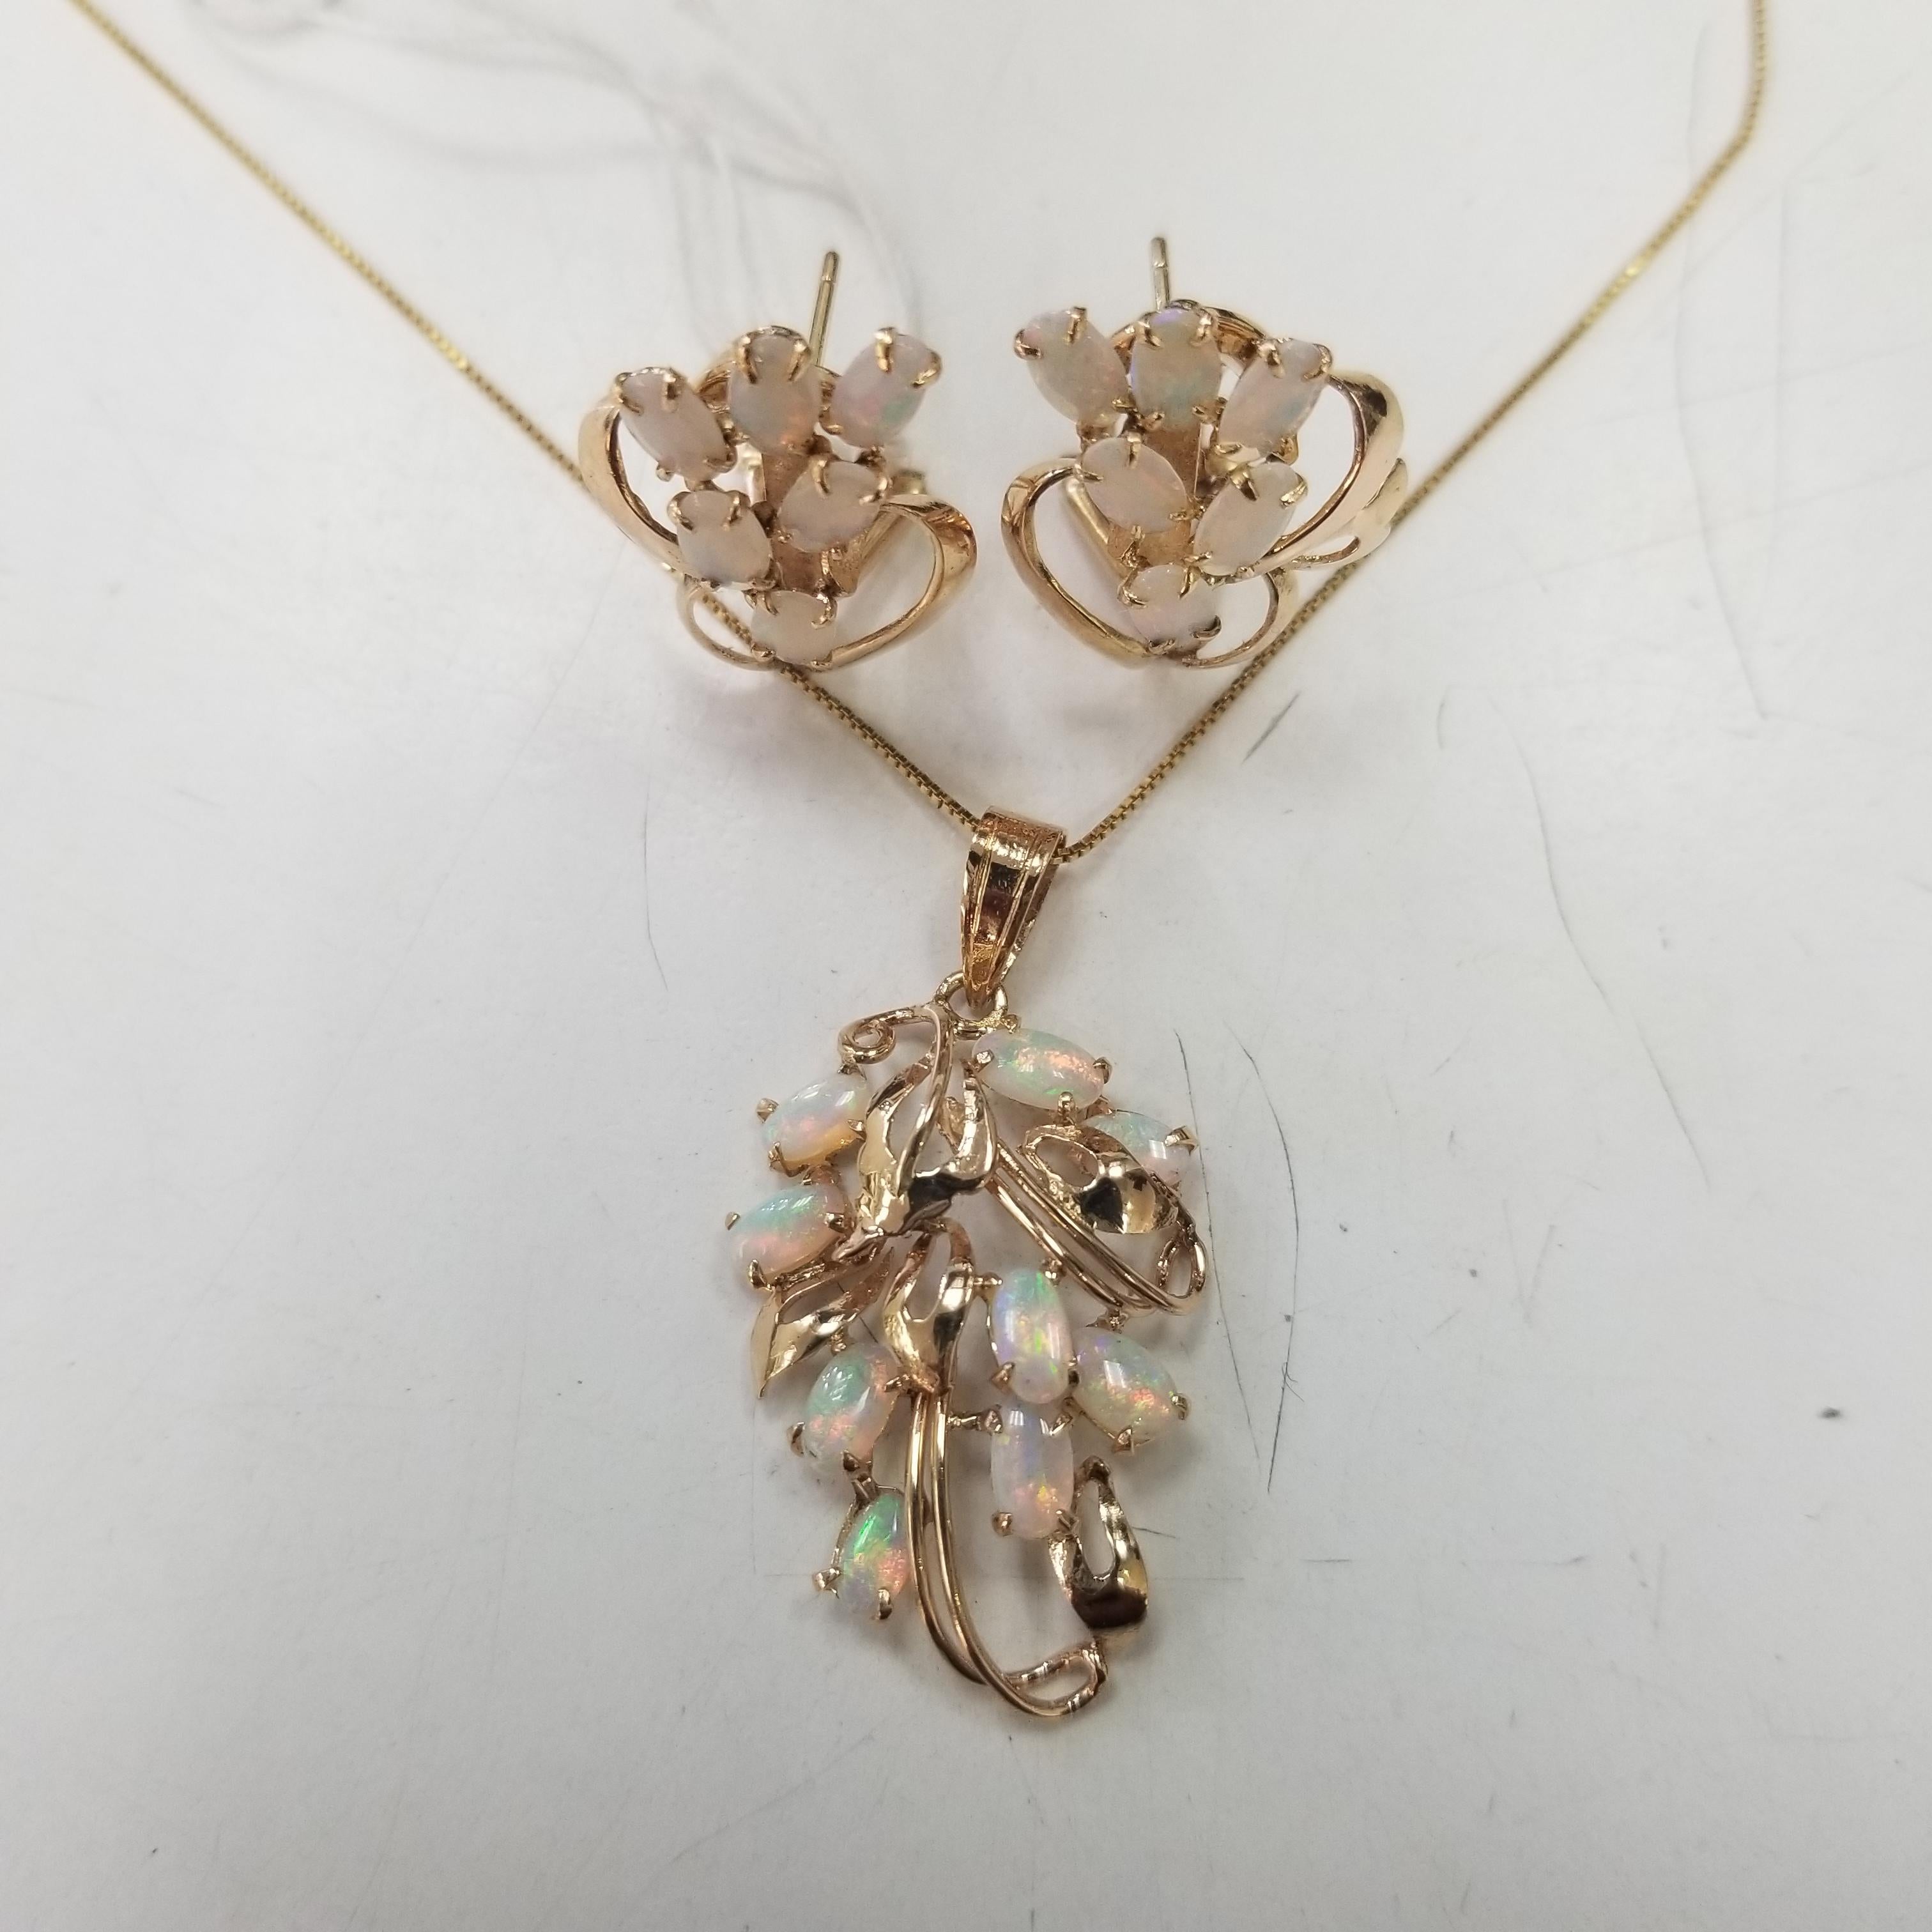 14k yellow gold opal pendant and earring set with 3.50 carats on an 18 inch chain. weighing 7.2 grams